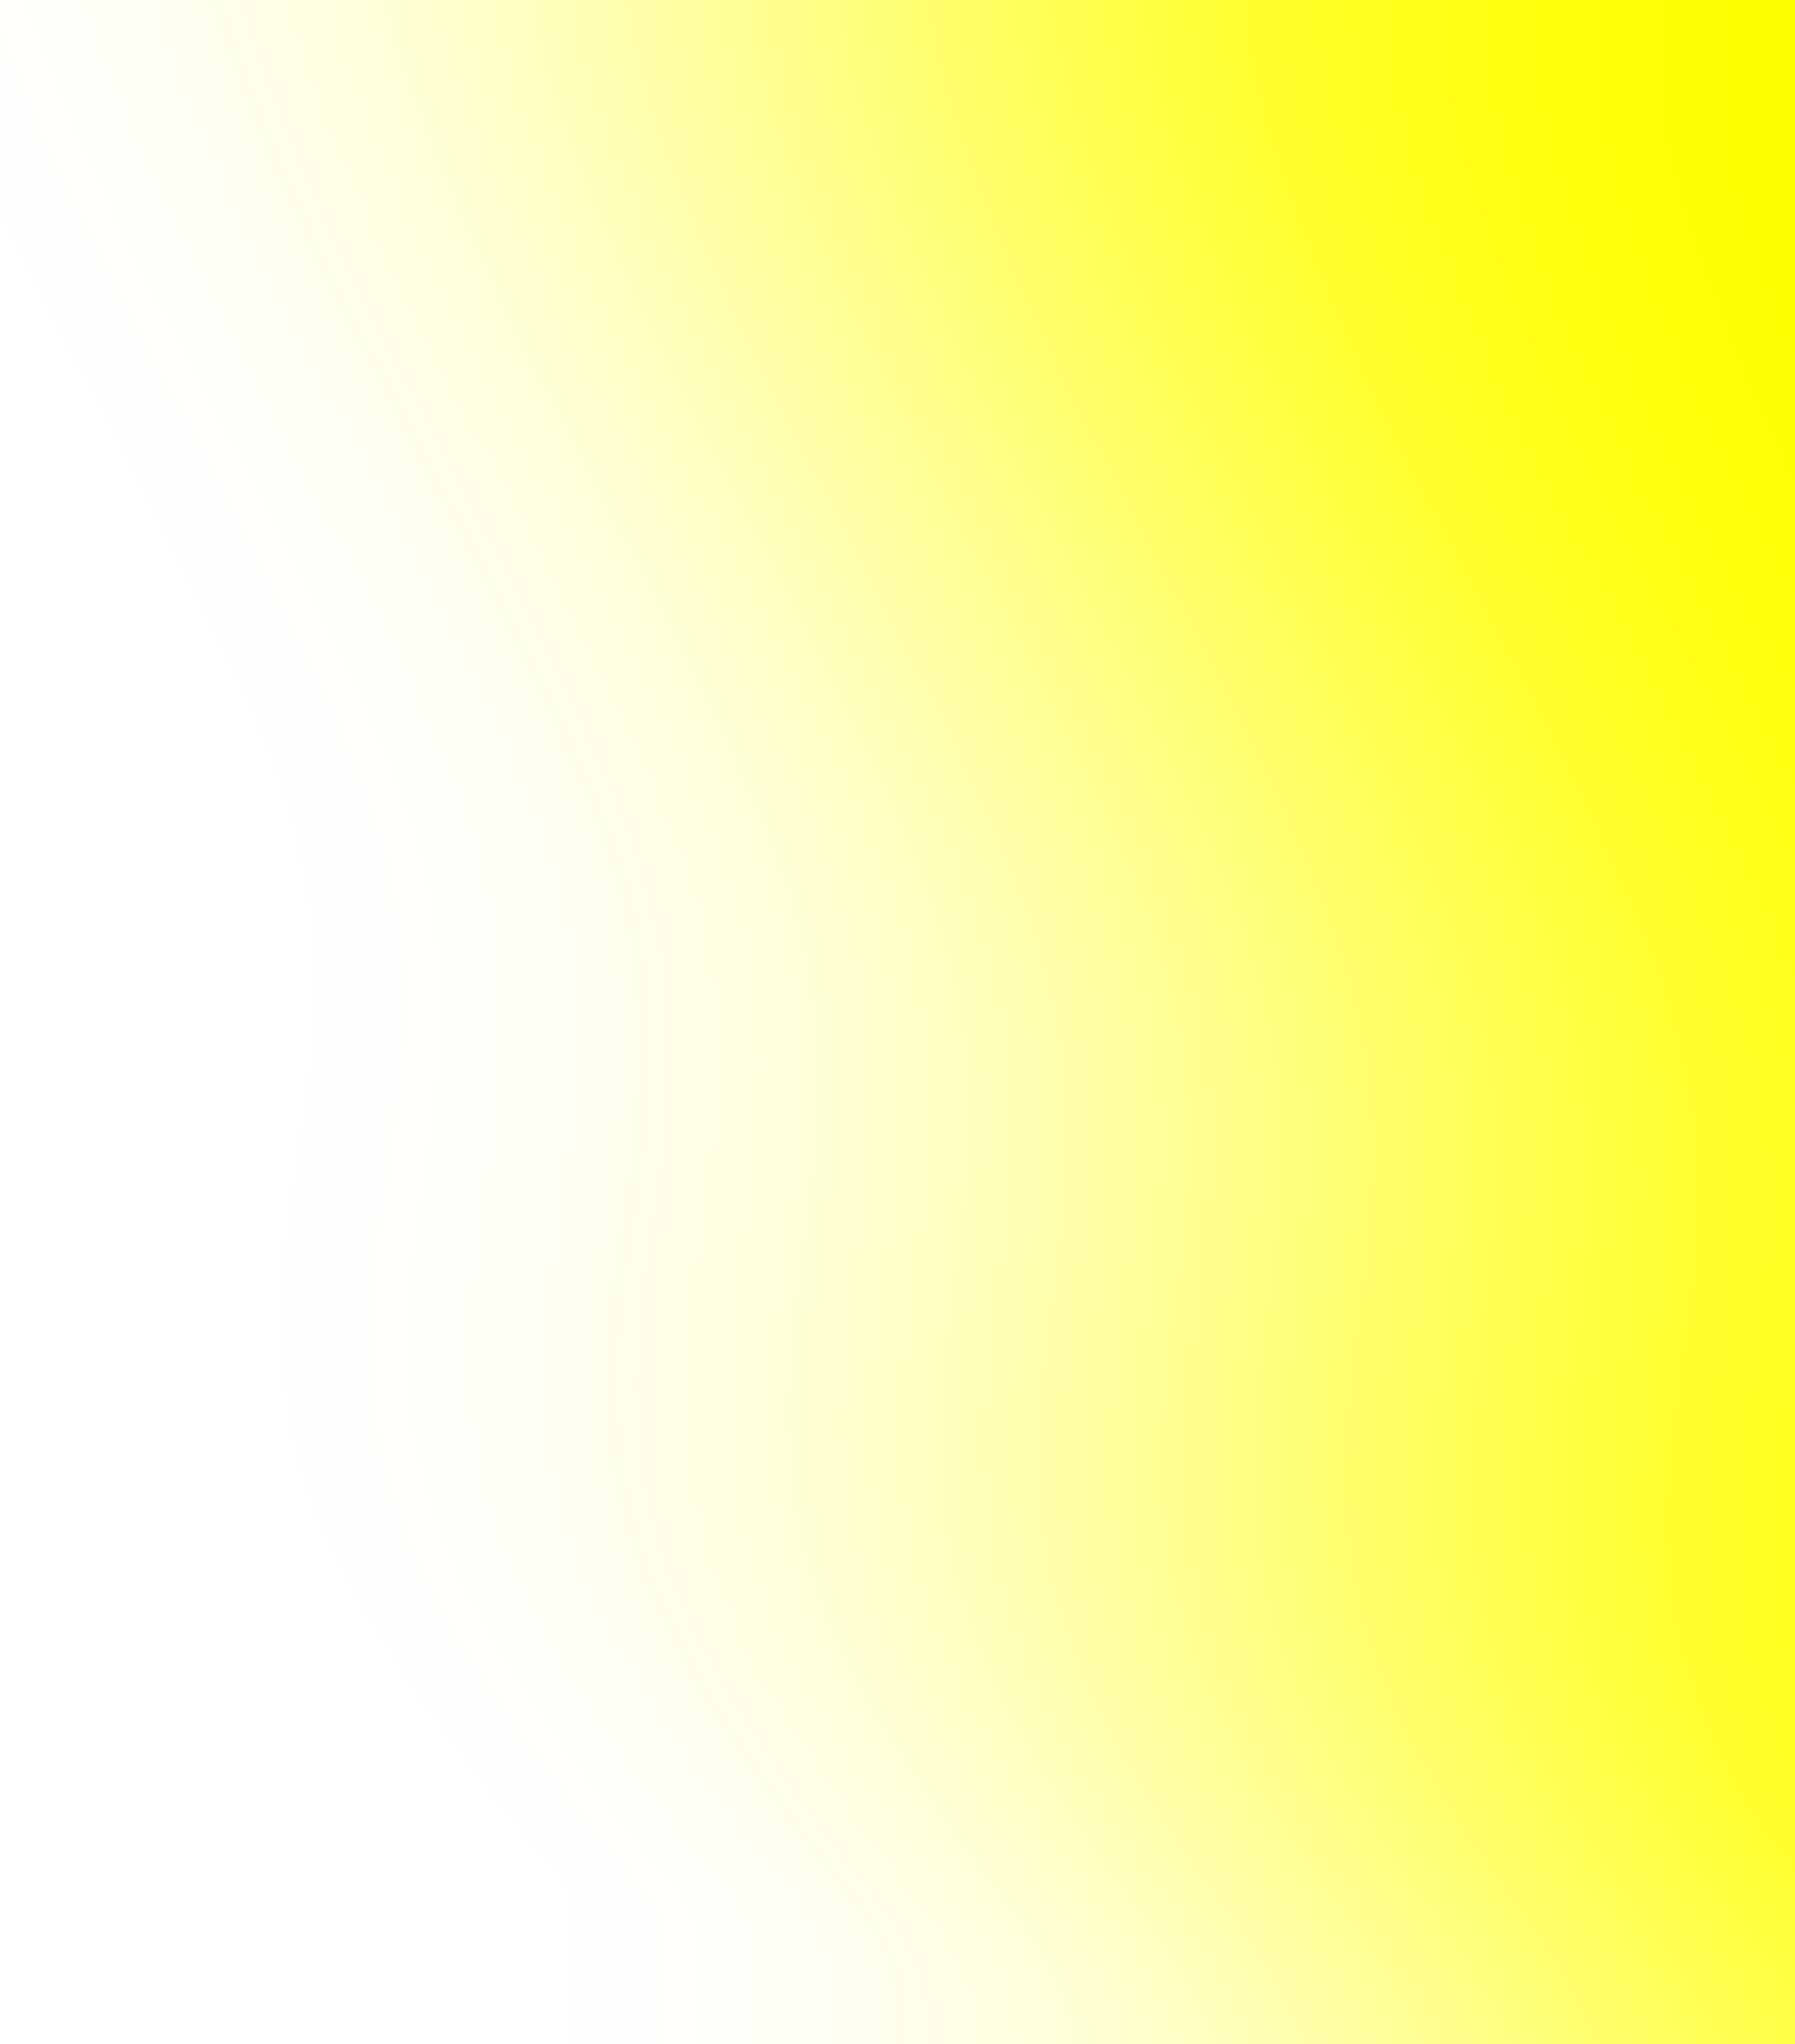 Yellow Gradient Transparency Fade